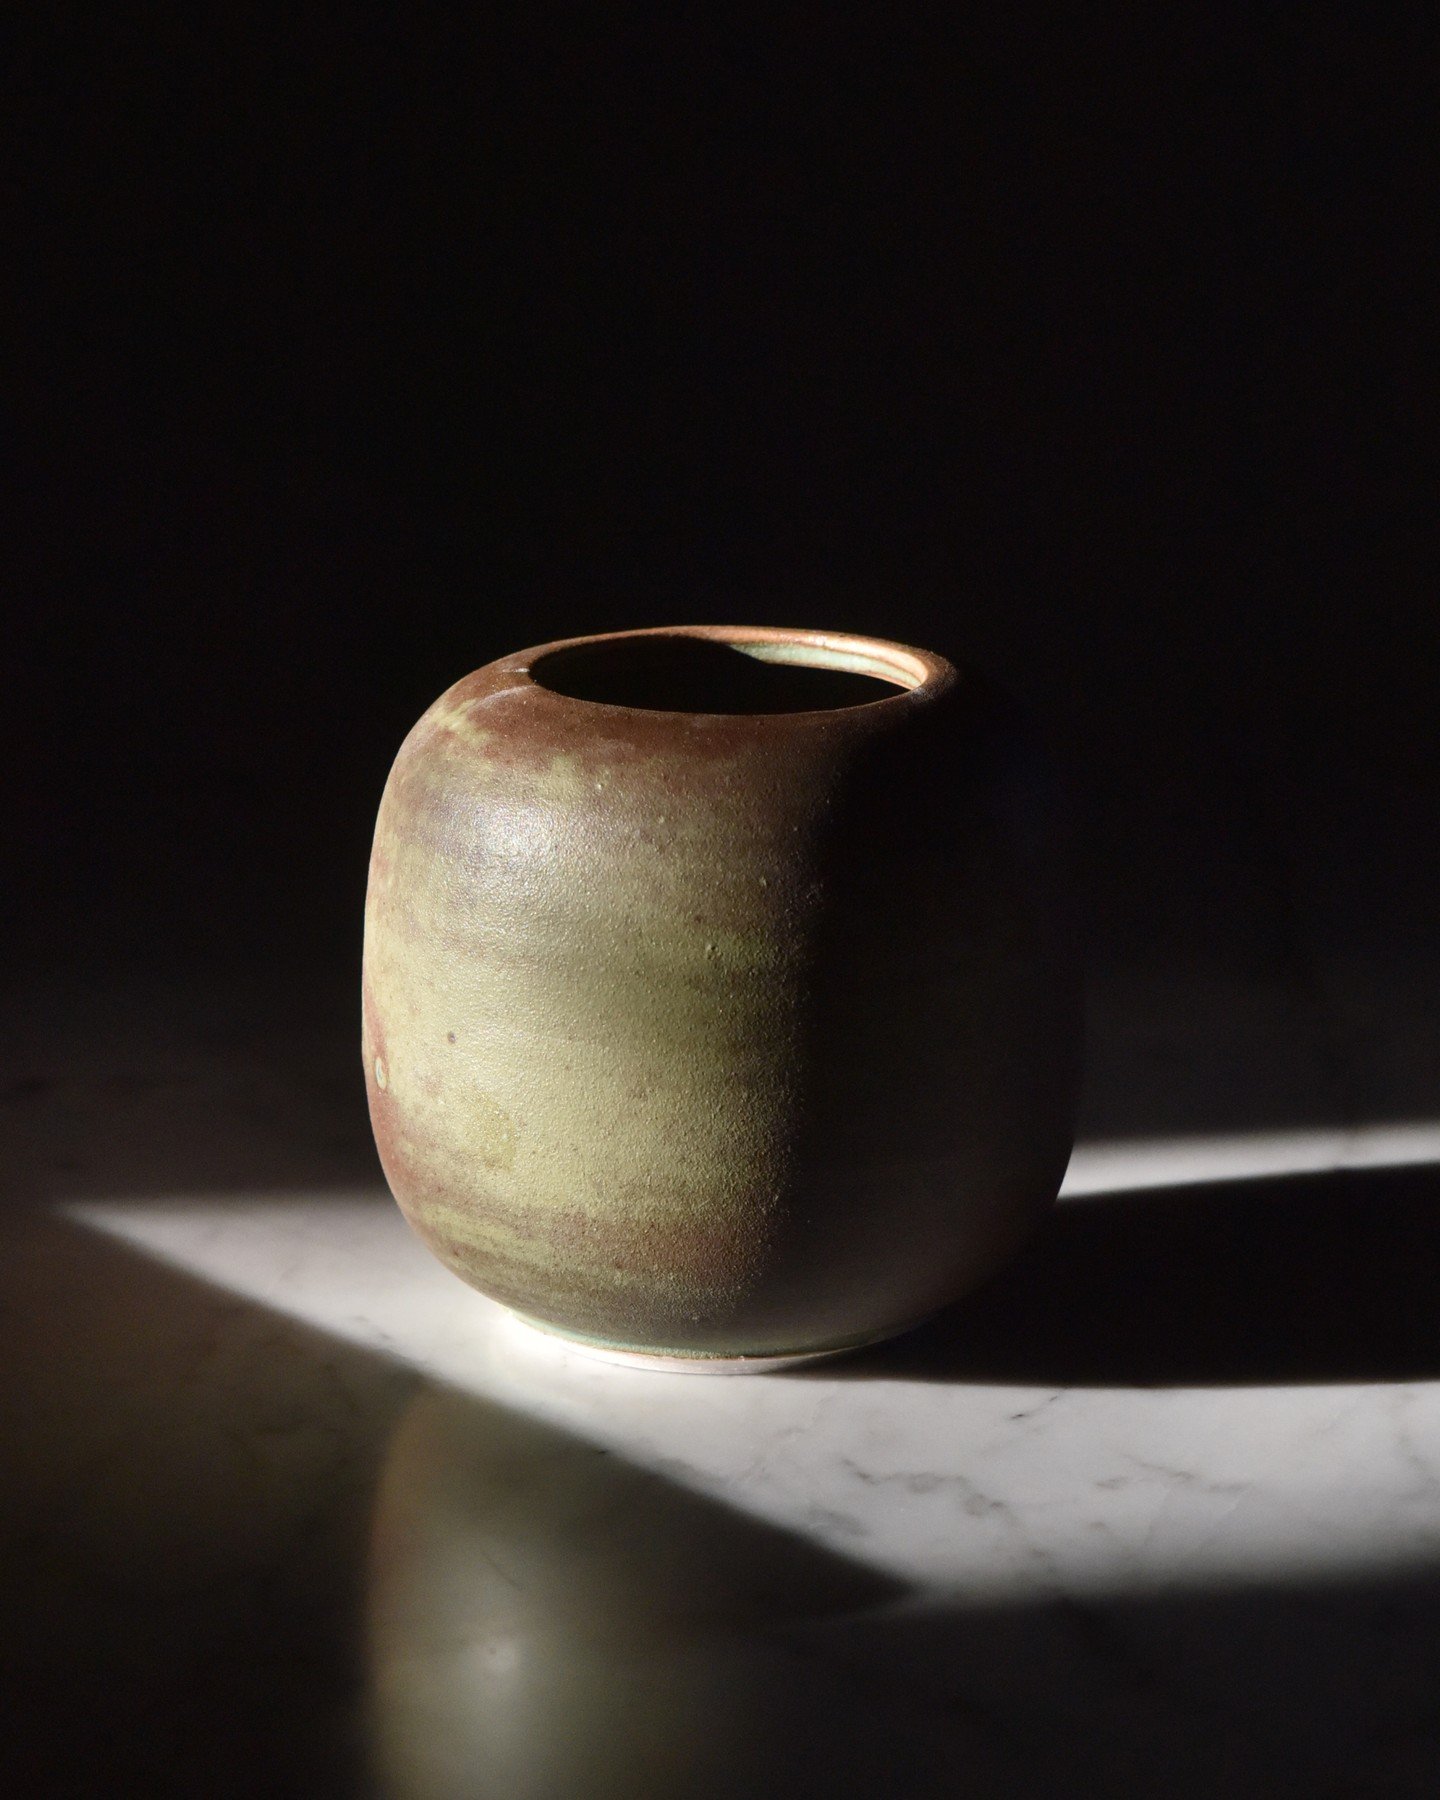 Glazing and firing of my pottery is done in a community studio in Berkeley, California @thepottersstudio. Just one of the benefits of the studio is the shared knowledge base &mdash; I've learned so much there from other members. Recently, @wheel.wenc